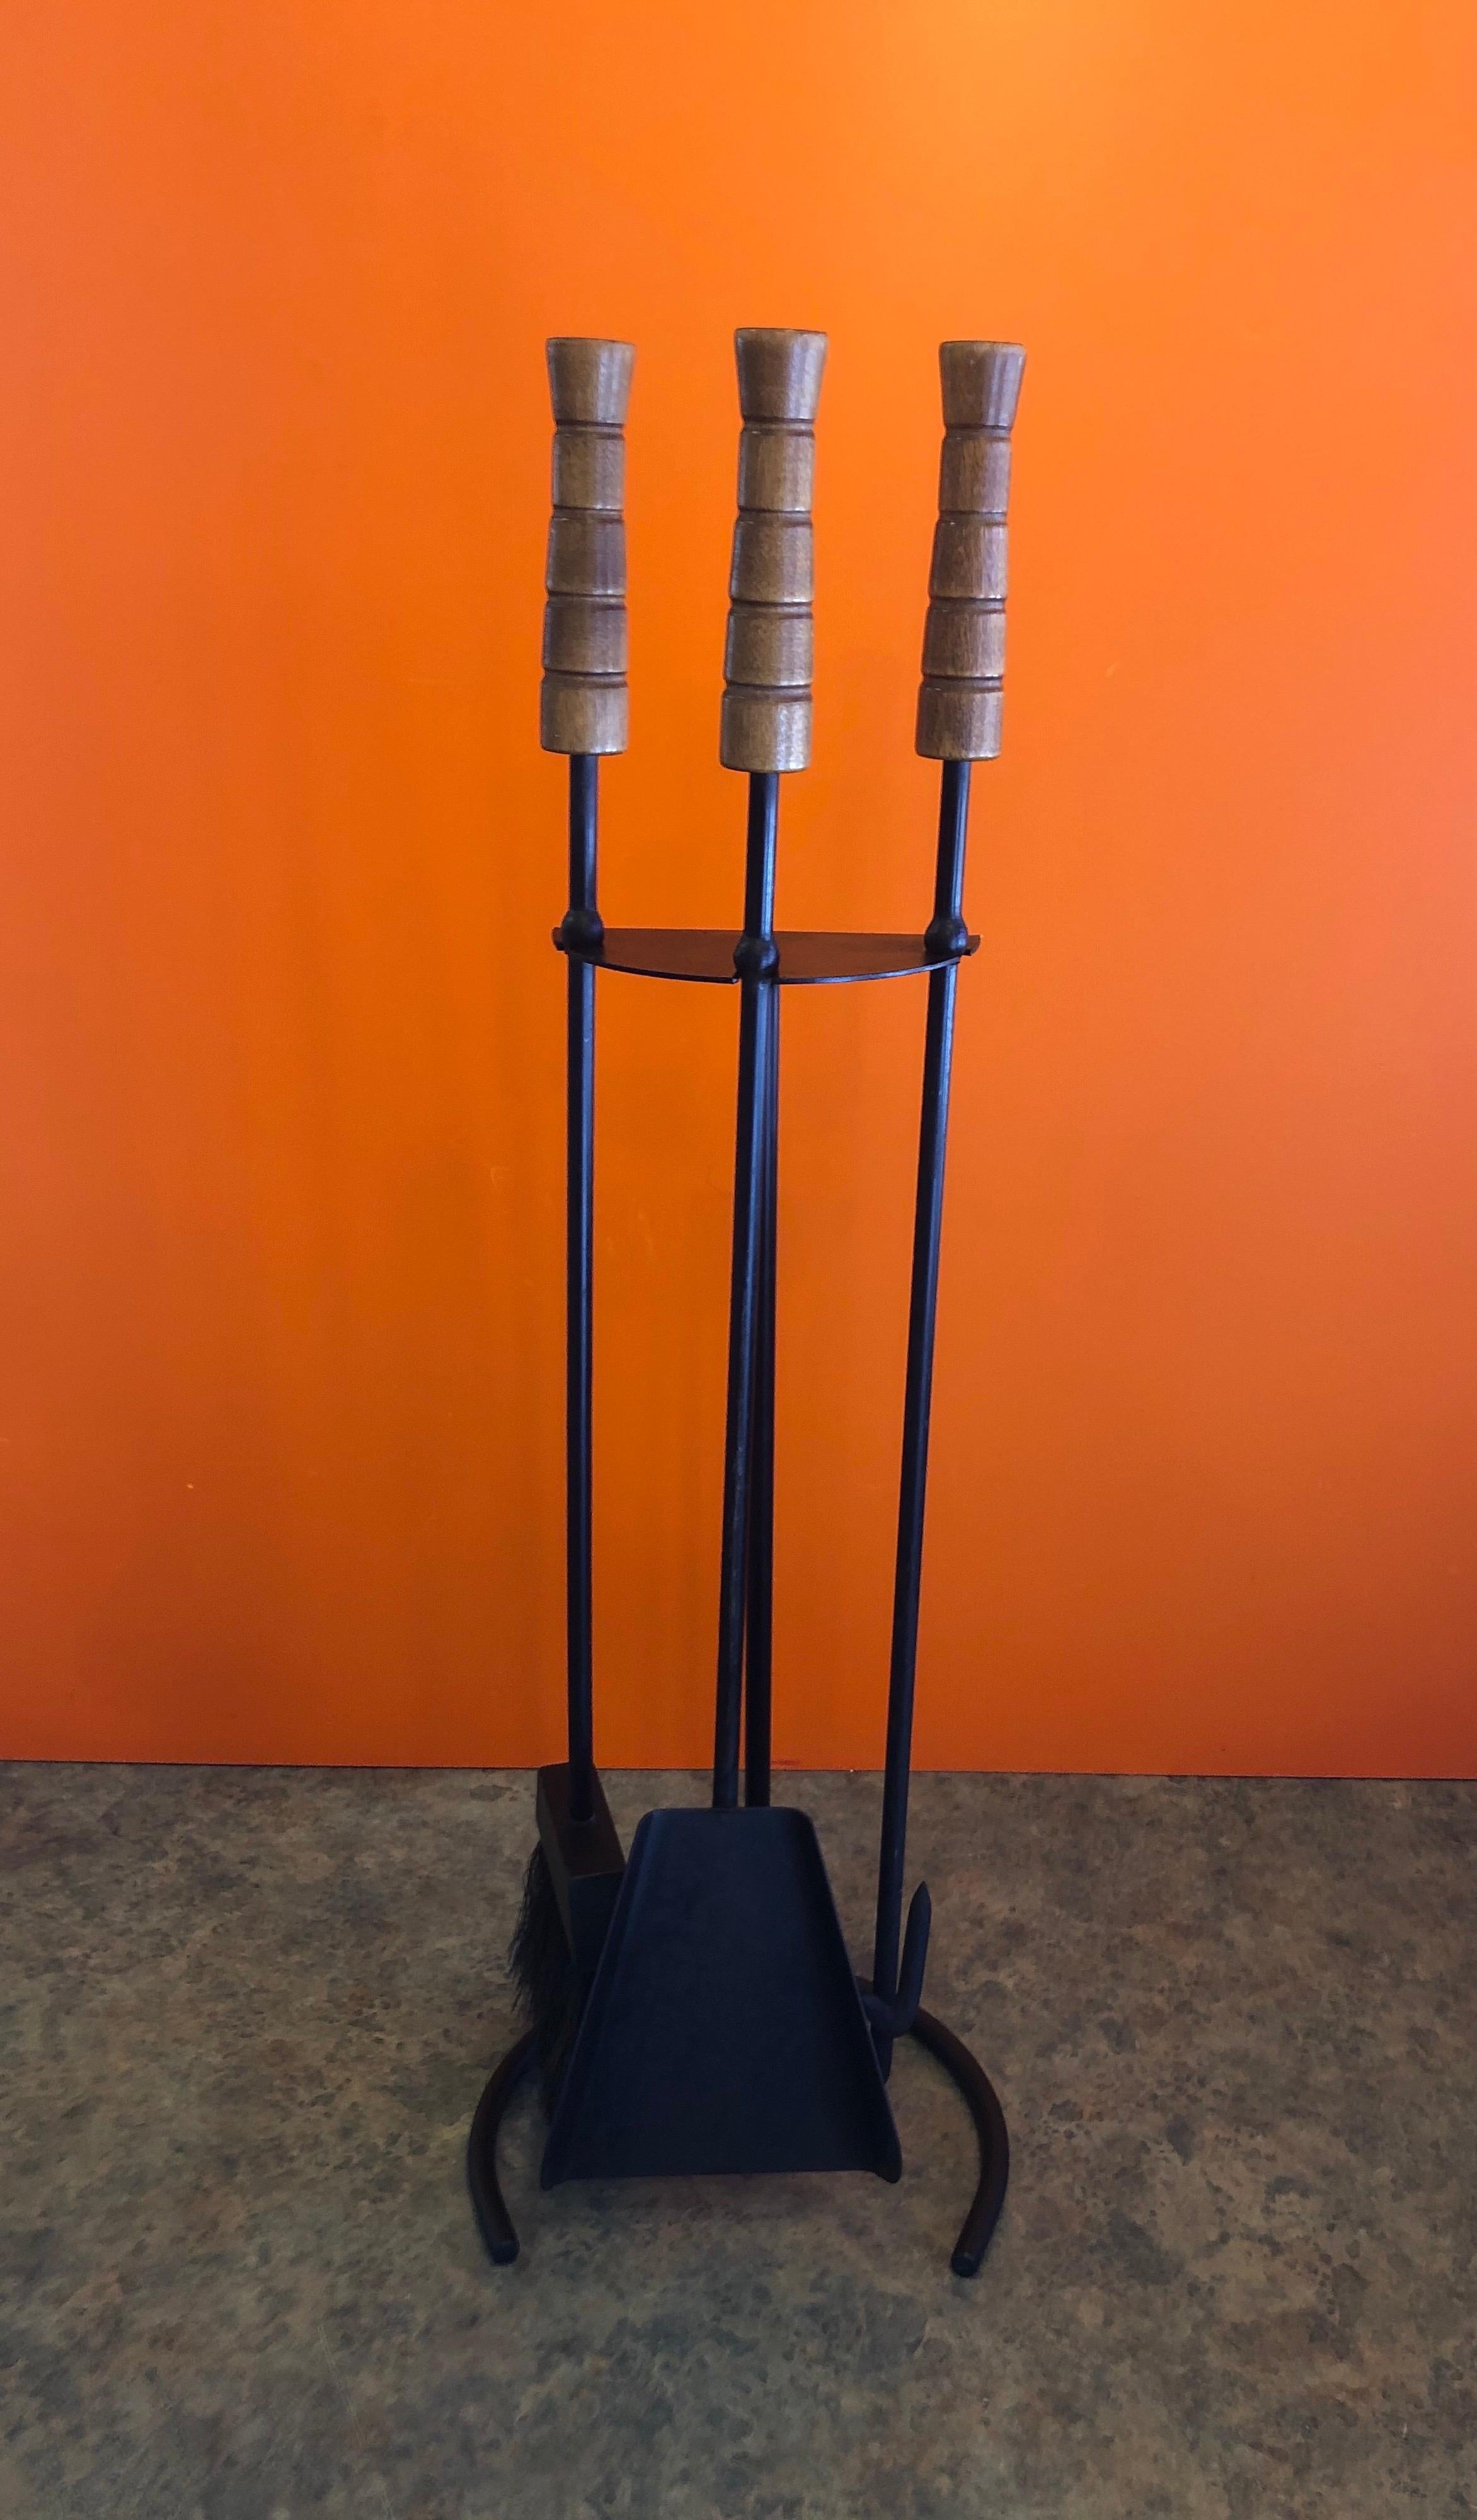 A set of modernist iron fireplace tools with wood handles (pine with walnut stain I beleive), circa 1970s. The set has three 25